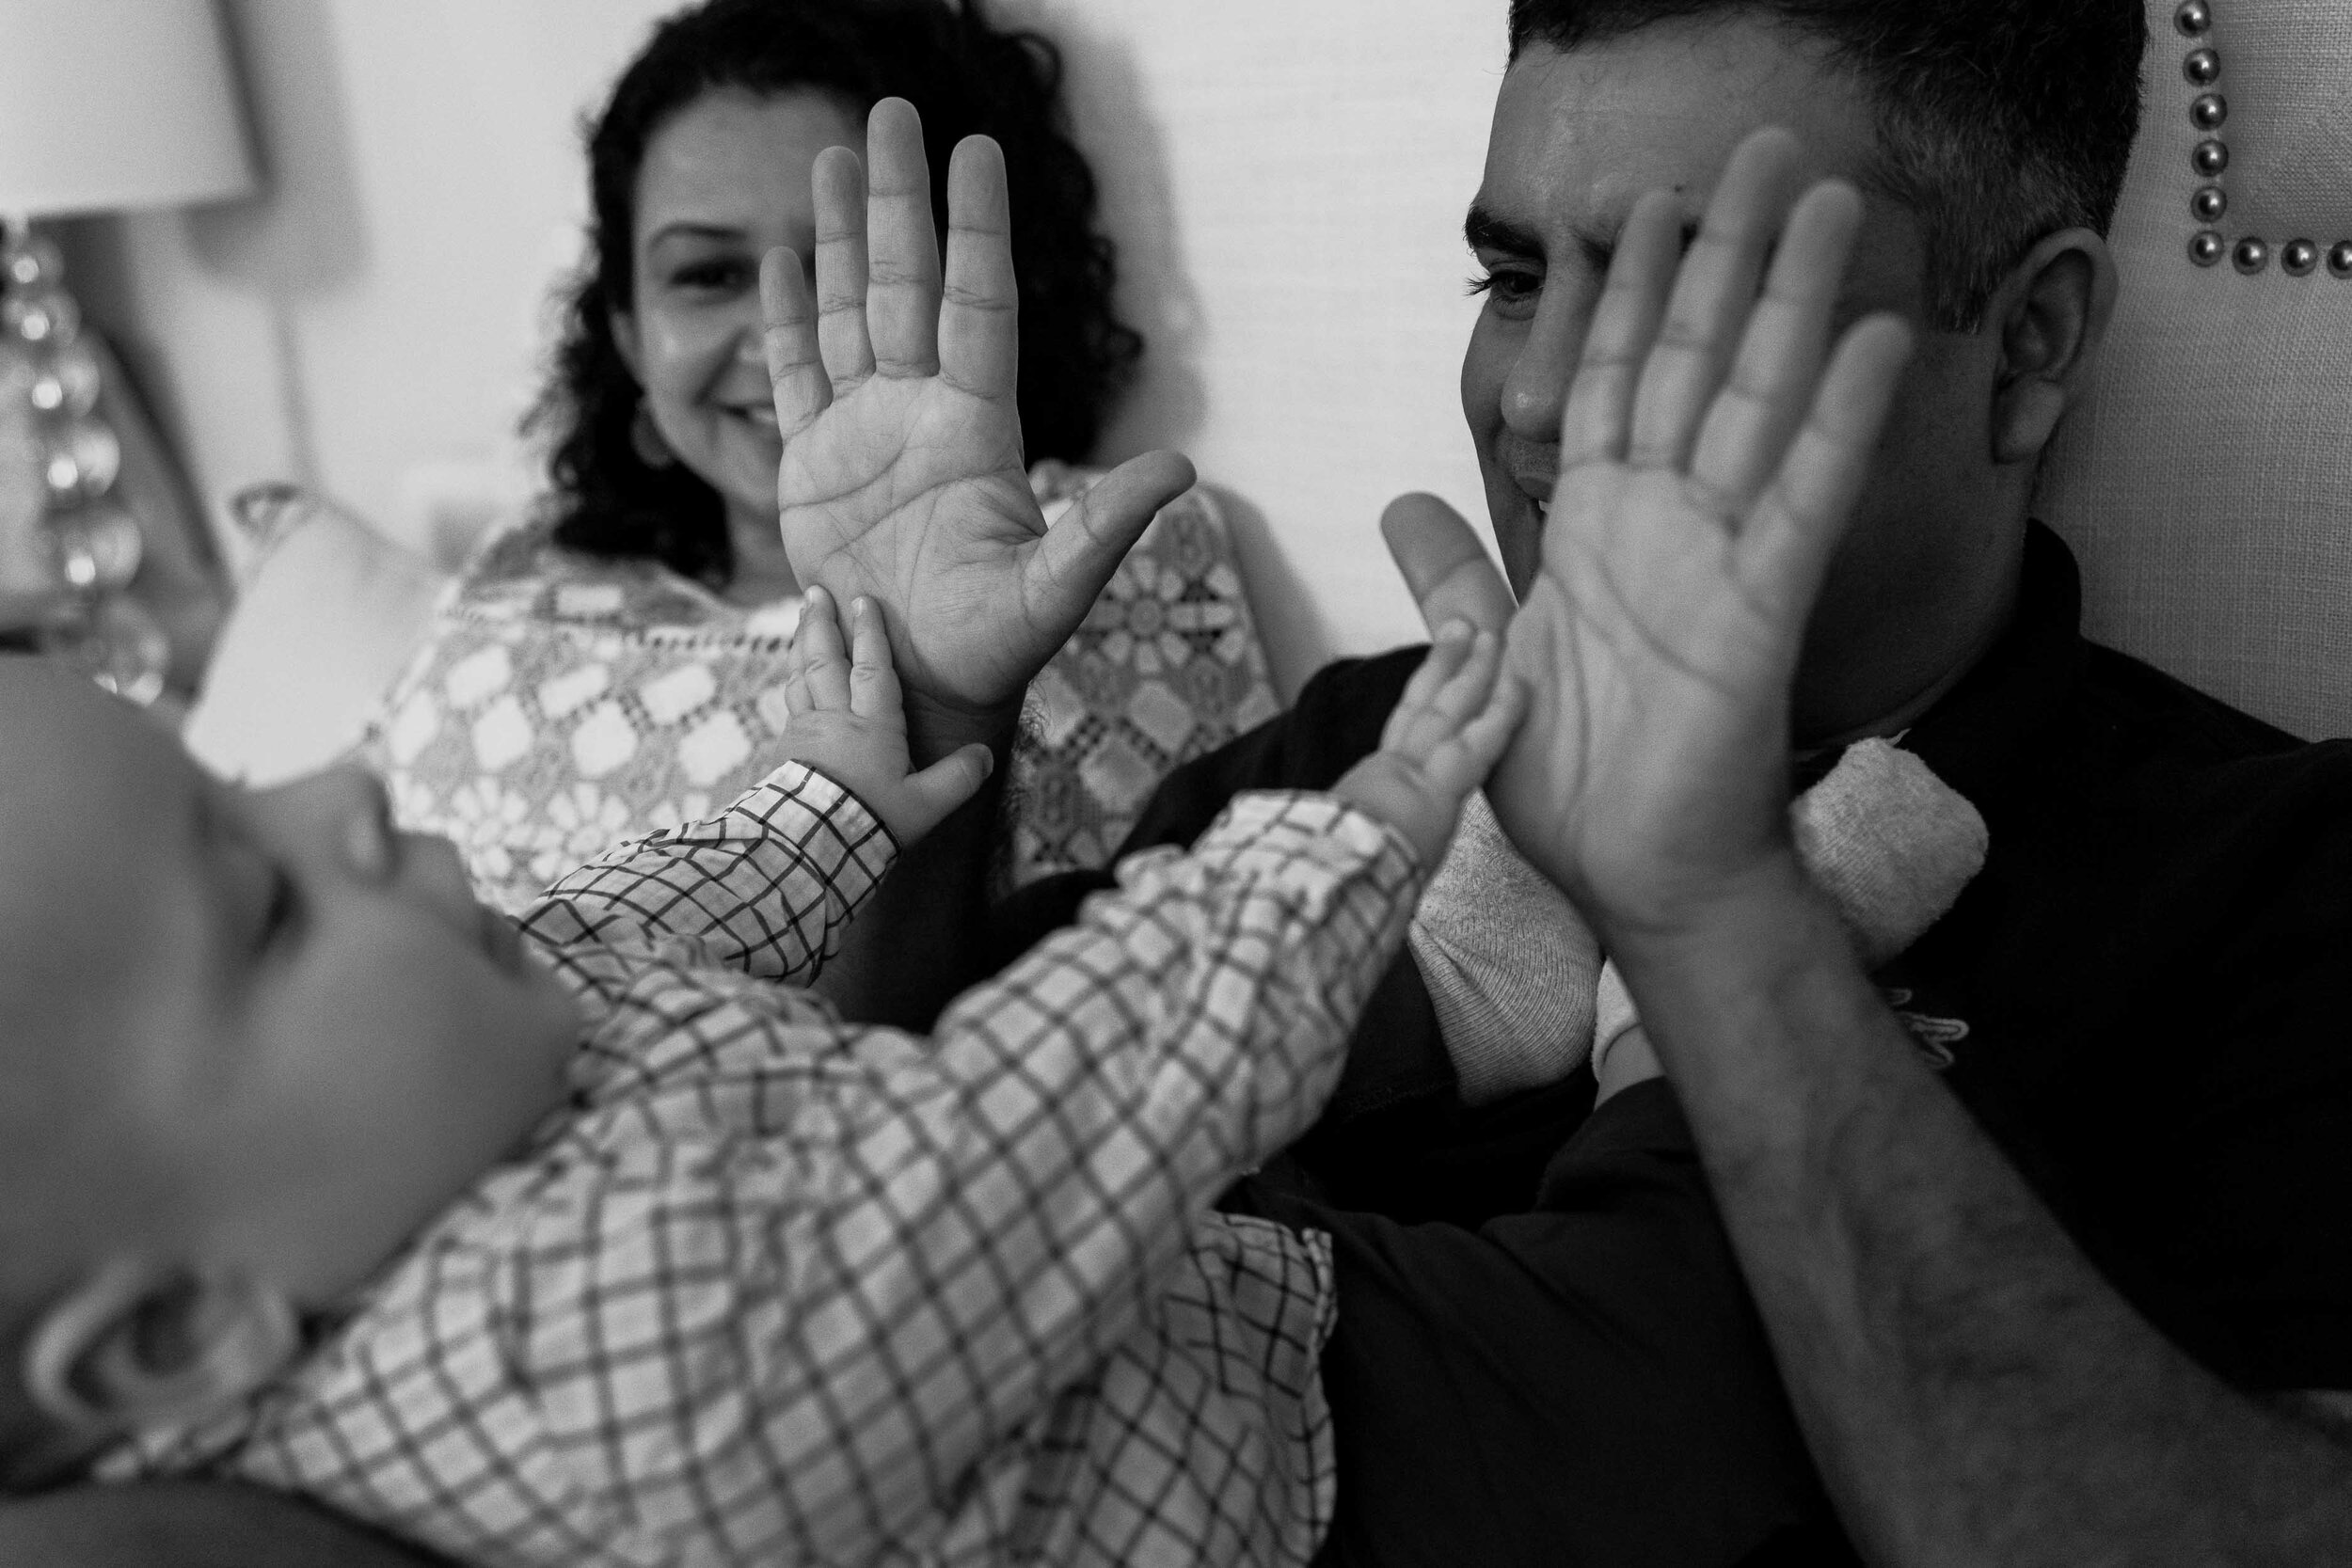 Baby and daddy playing patty cake, black and white family photograph